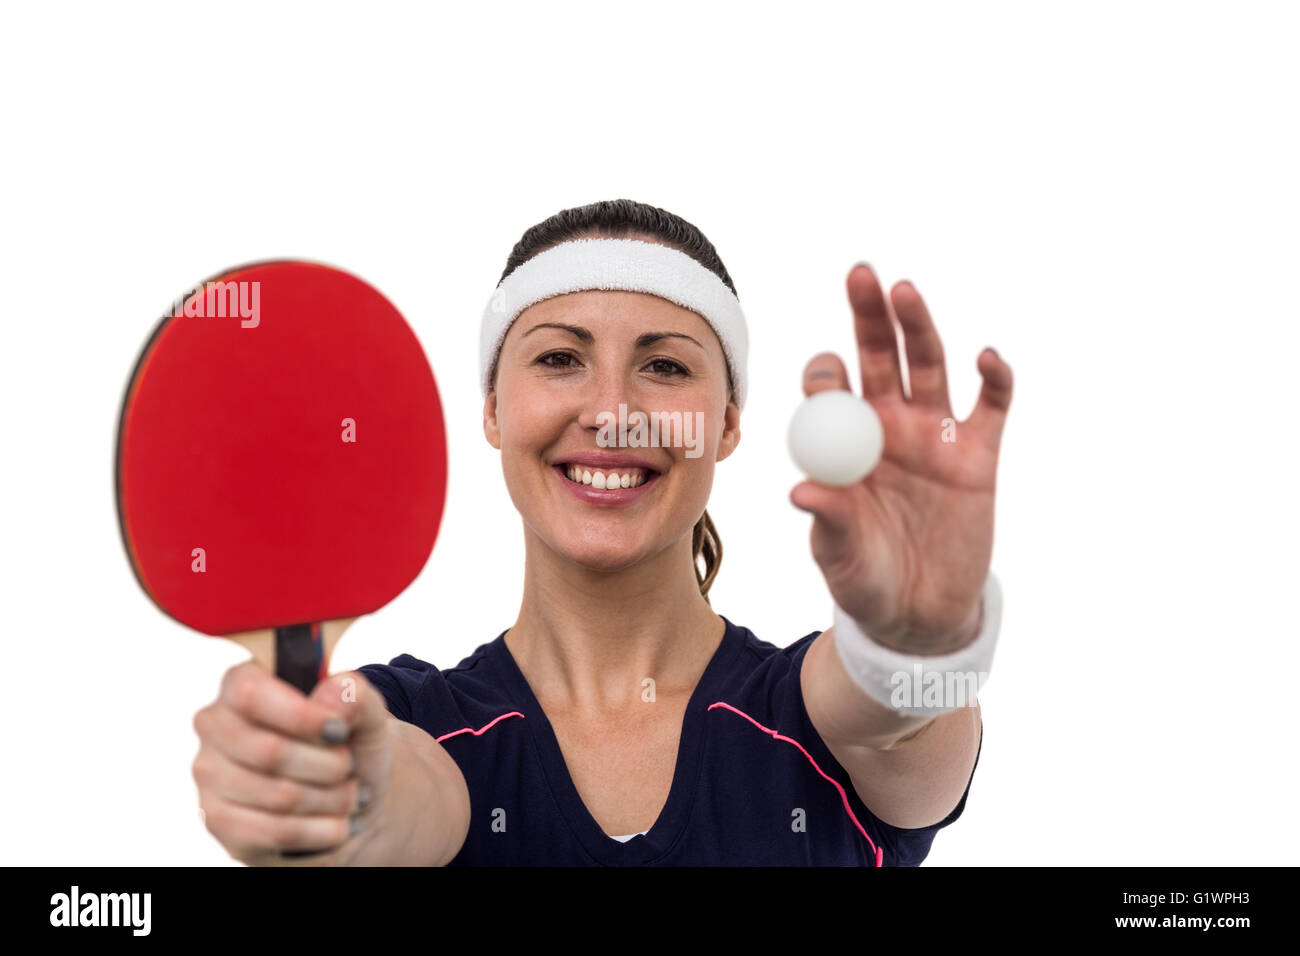 Female athlete holding table tennis paddle and ball Stock Photo